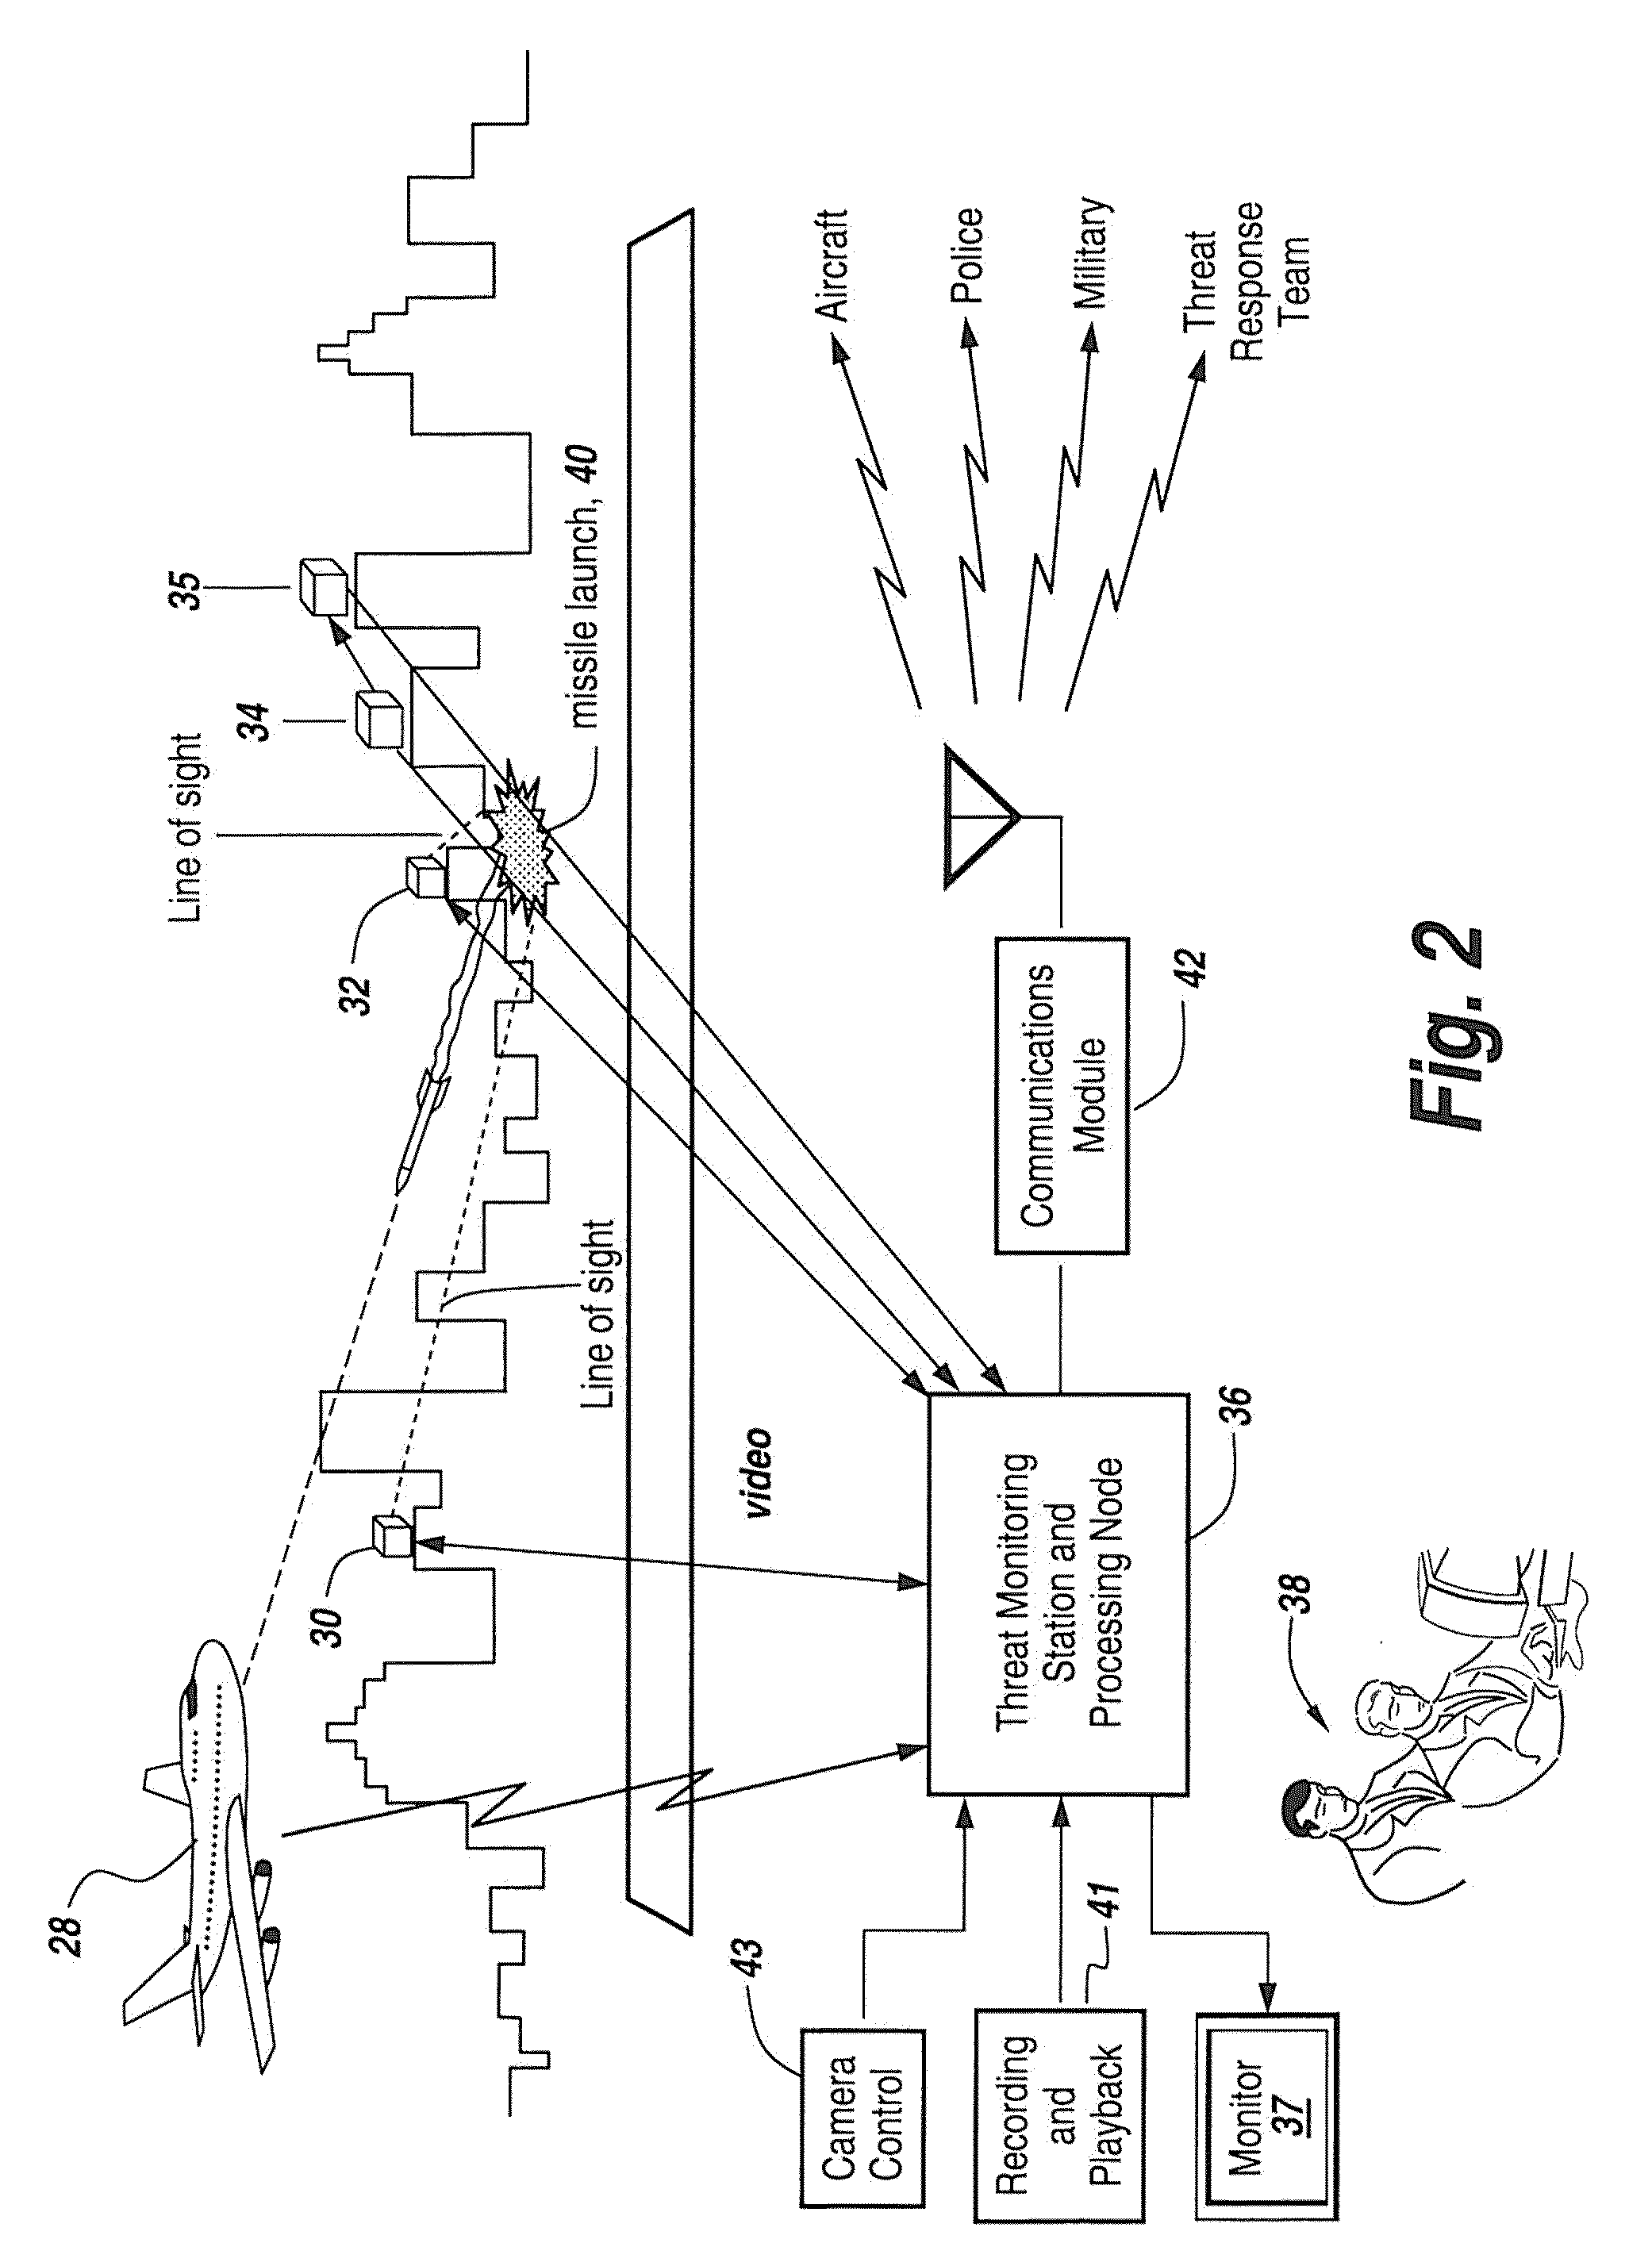 Method and system for finding a manpads launcher position